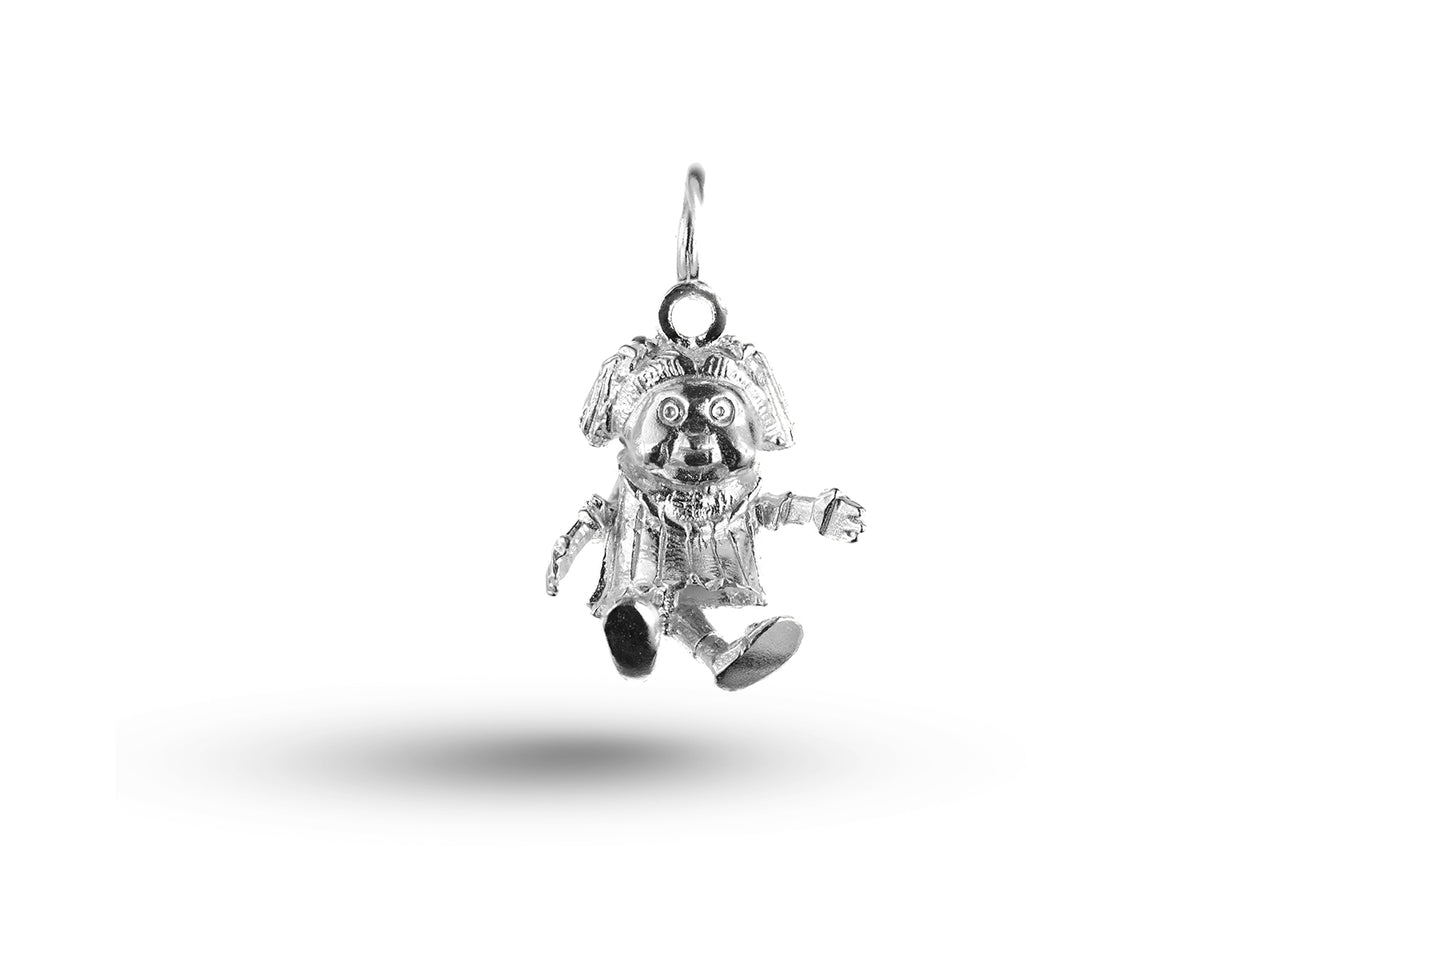 Luxury white gold baby doll charm.